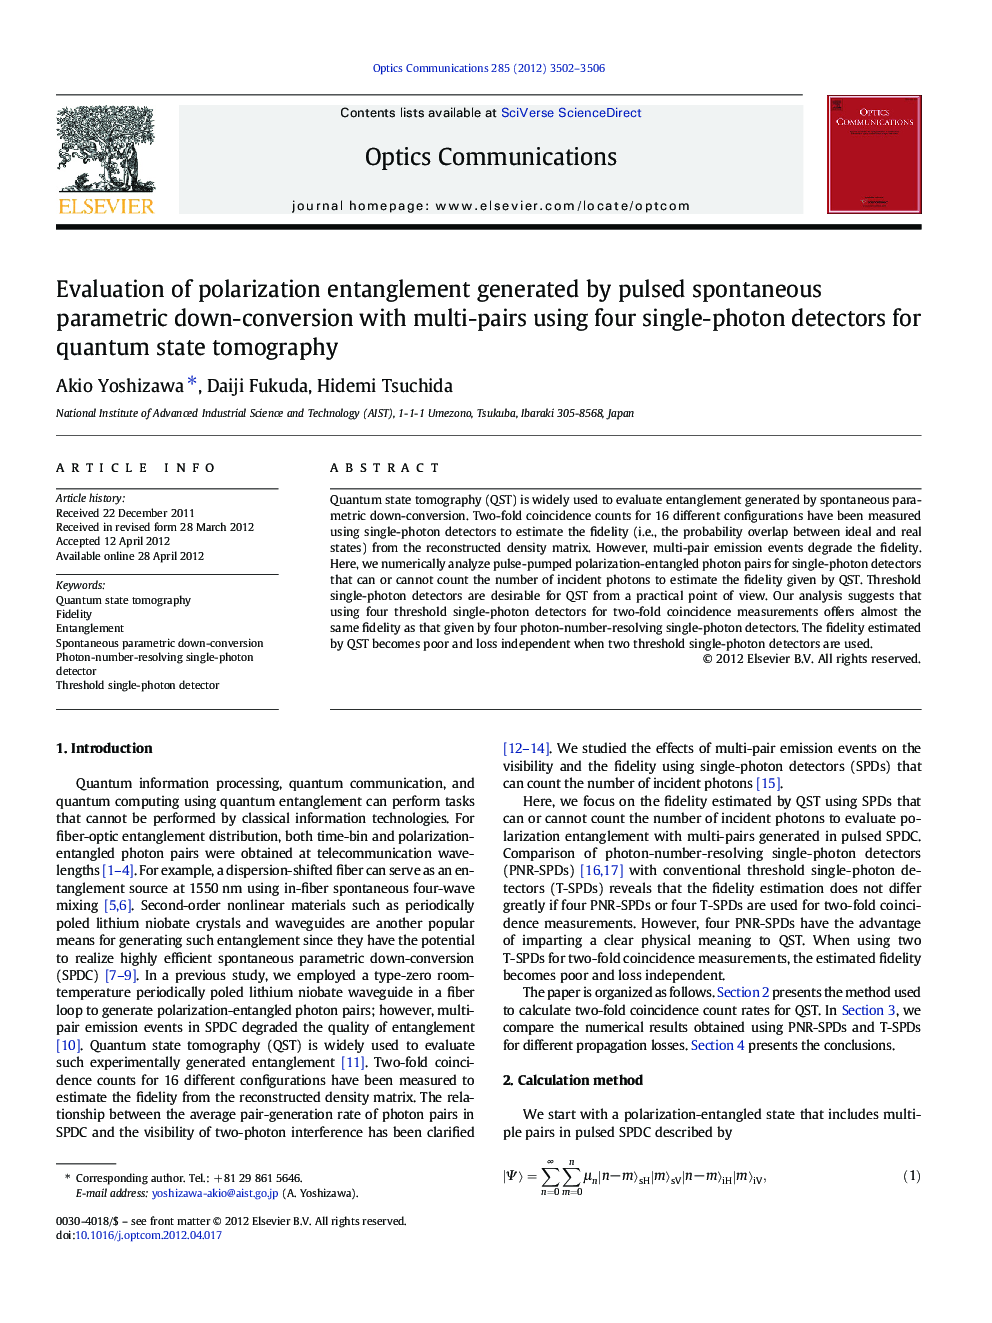 Evaluation of polarization entanglement generated by pulsed spontaneous parametric down-conversion with multi-pairs using four single-photon detectors for quantum state tomography